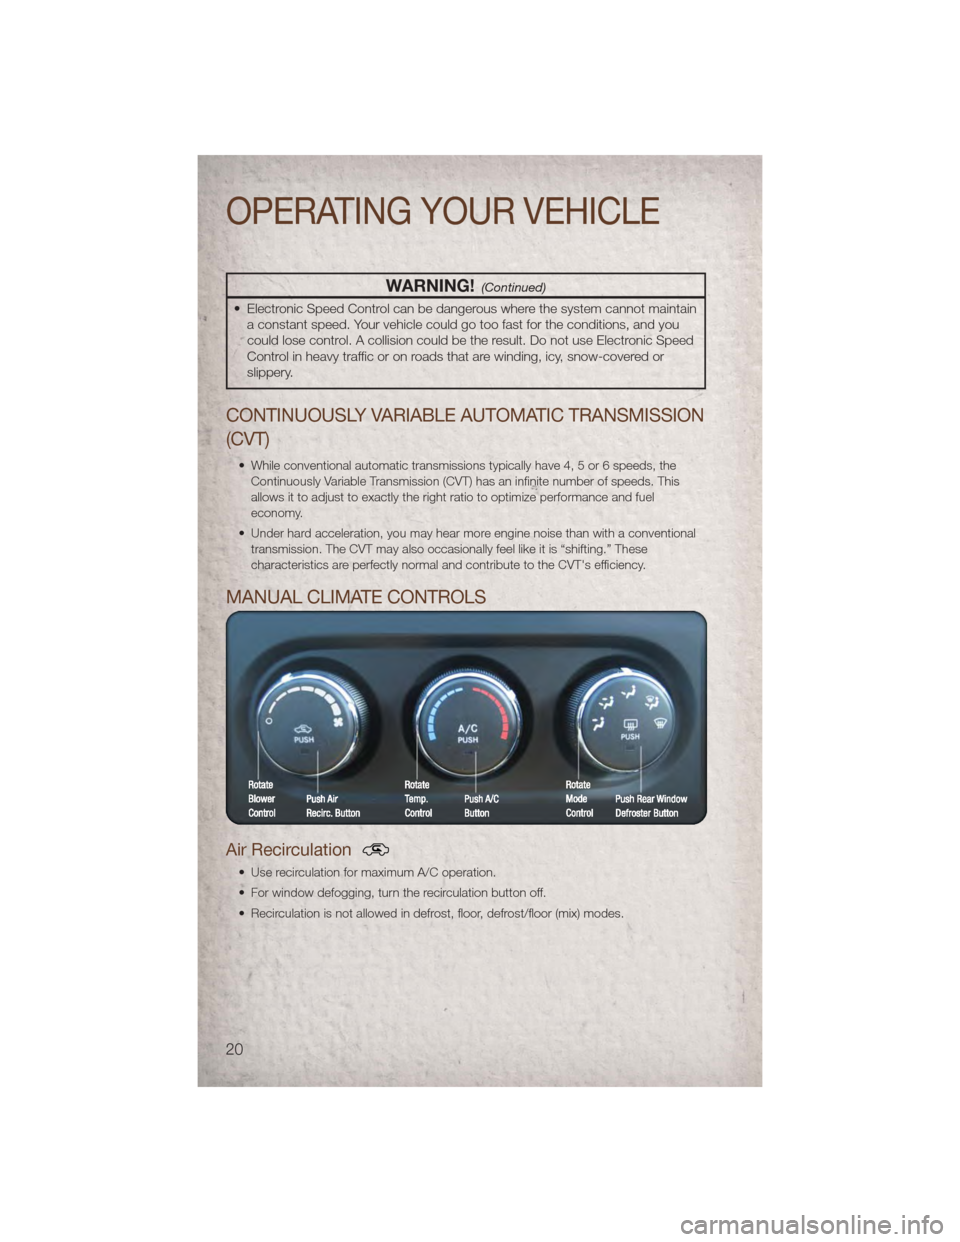 JEEP PATRIOT 2011 1.G User Guide WARNING!(Continued)
• Electronic Speed Control can be dangerous where the system cannot maintaina constant speed. Your vehicle could go too fast for the conditions, and you
could lose control. A col